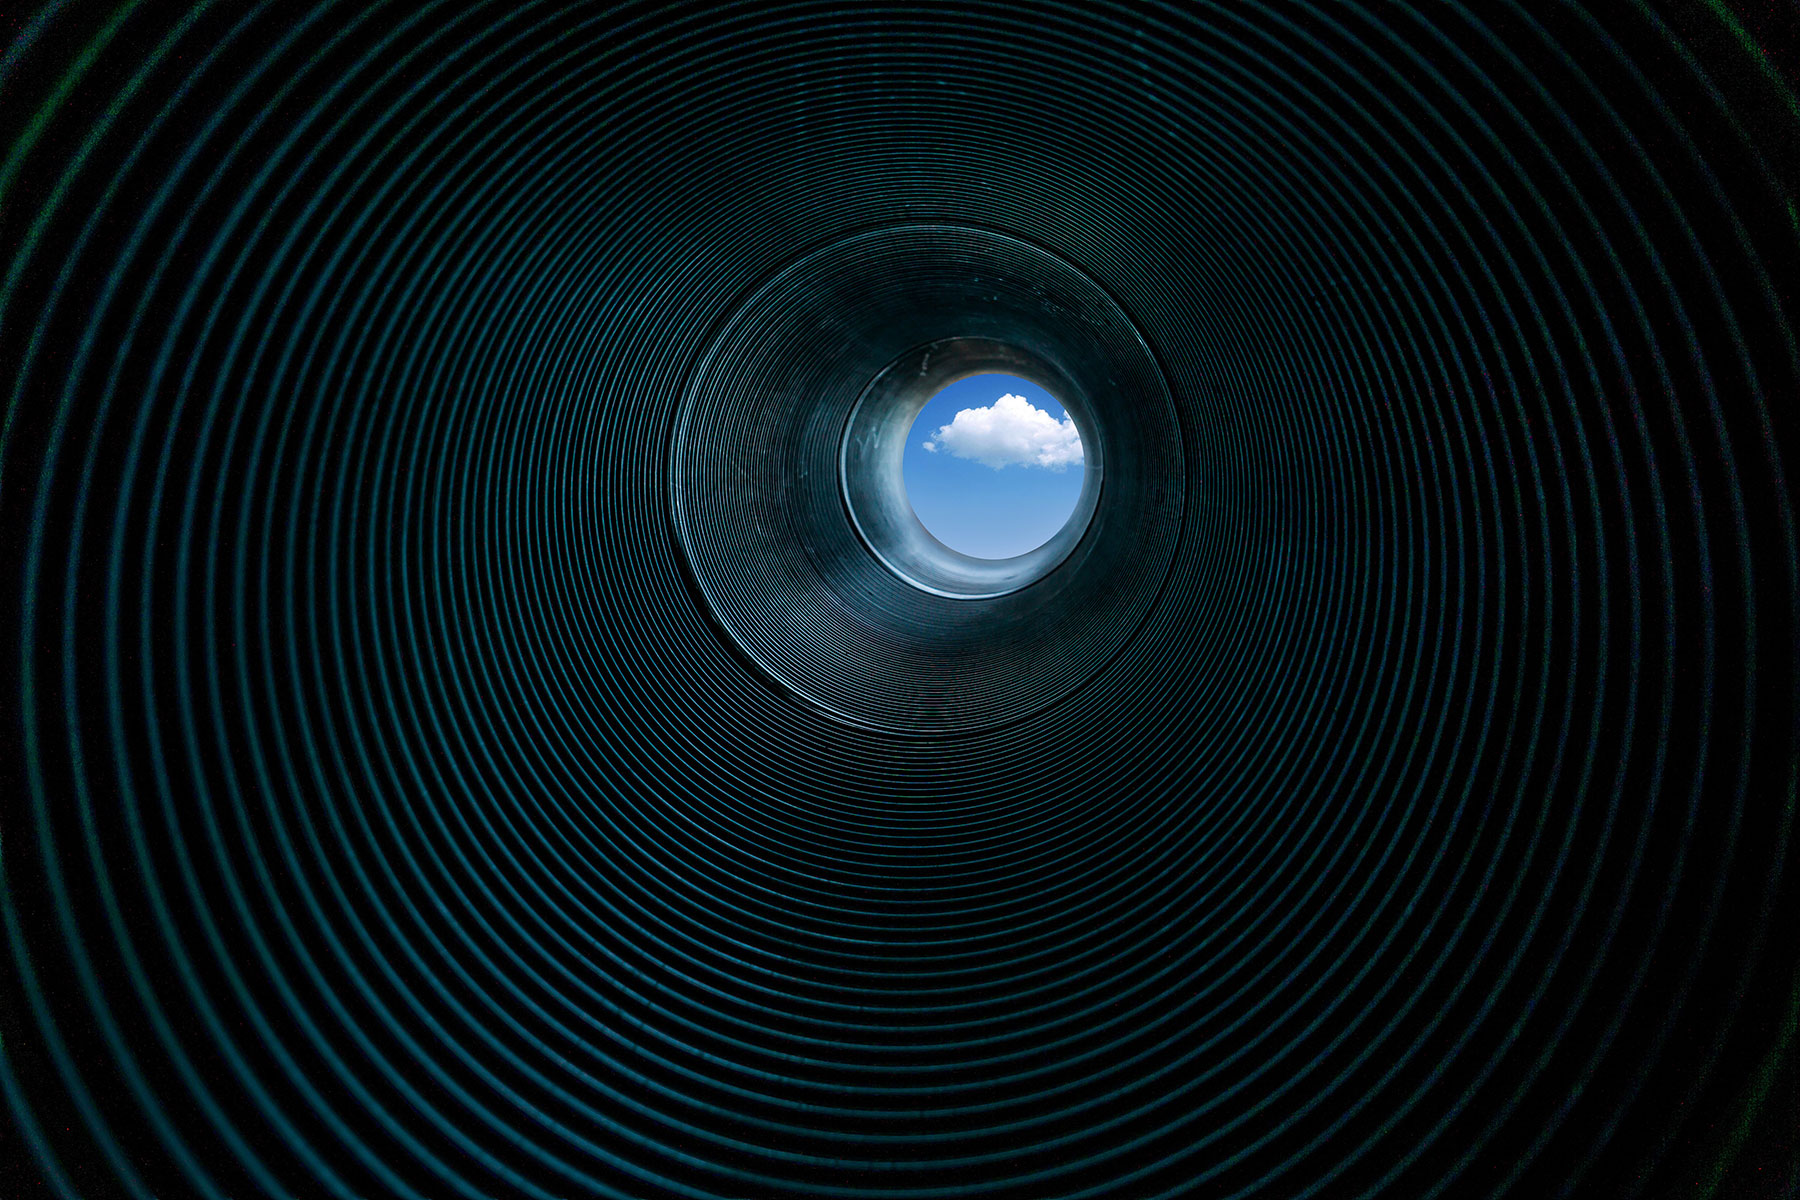 A tunnel with a blue sky peeking out of the end